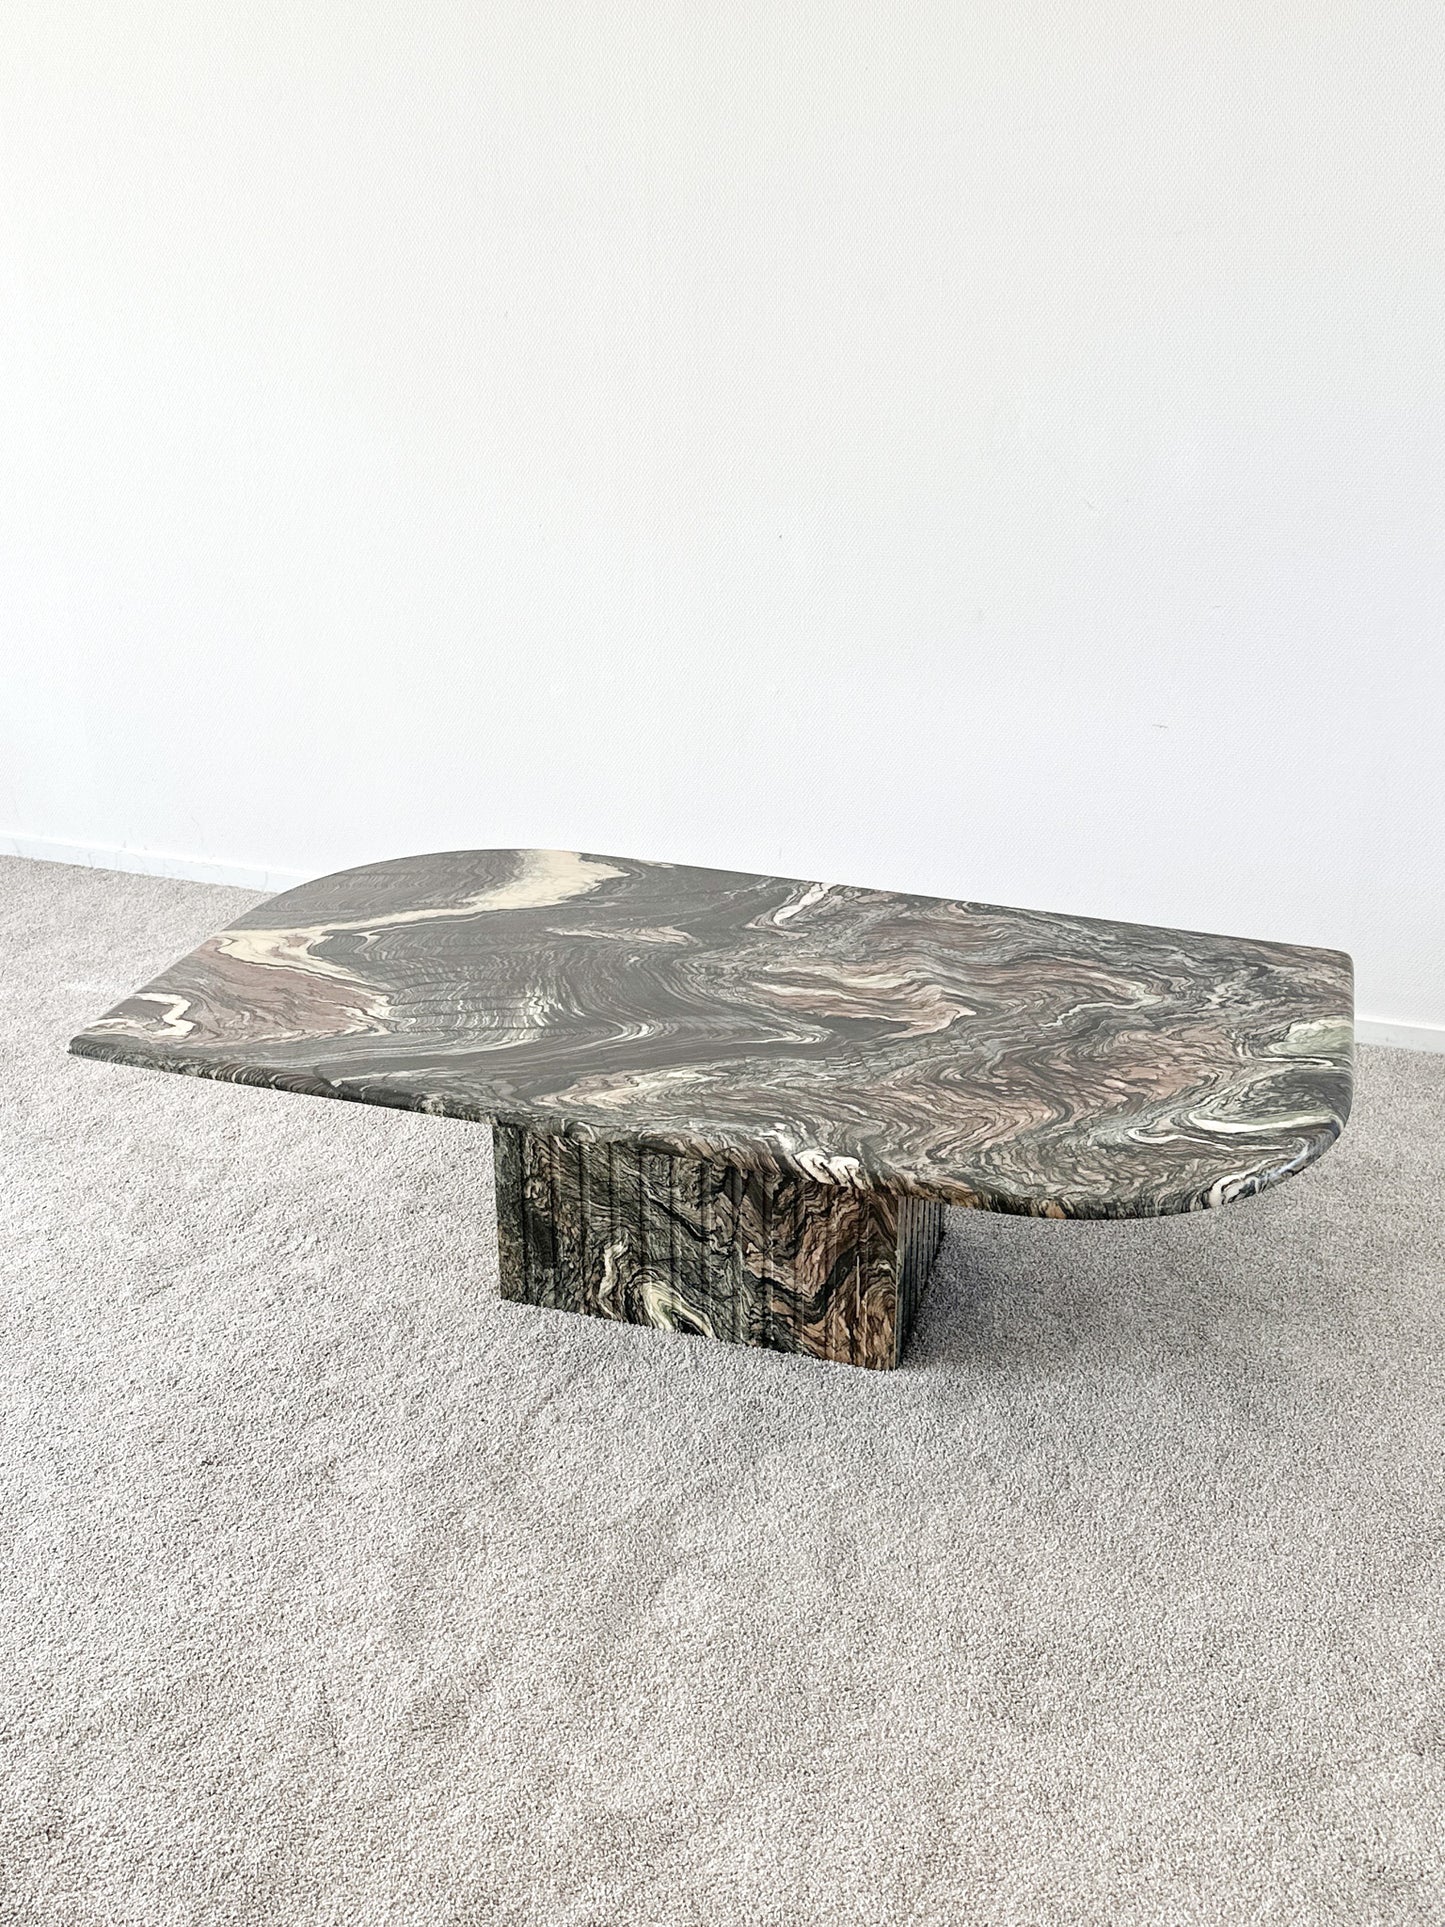 PENDING — Vintage Marble Coffee Table, Italy // 1980s